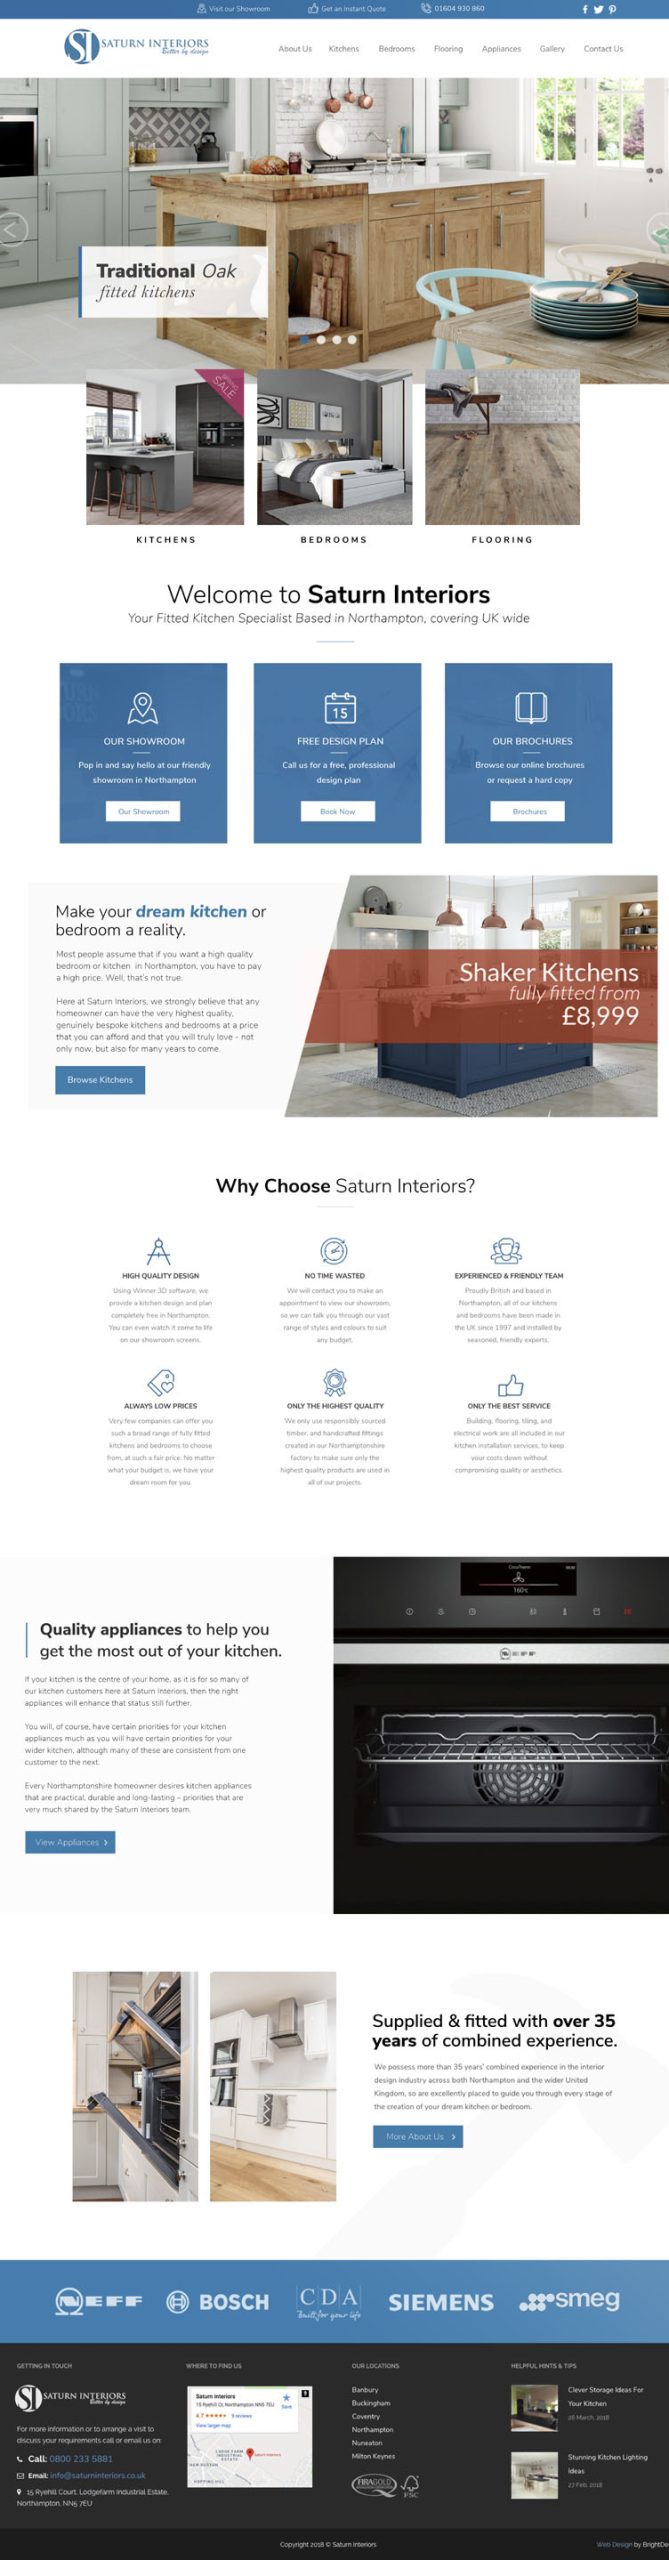 A full mock-up of a website design created for Saturn Interiors